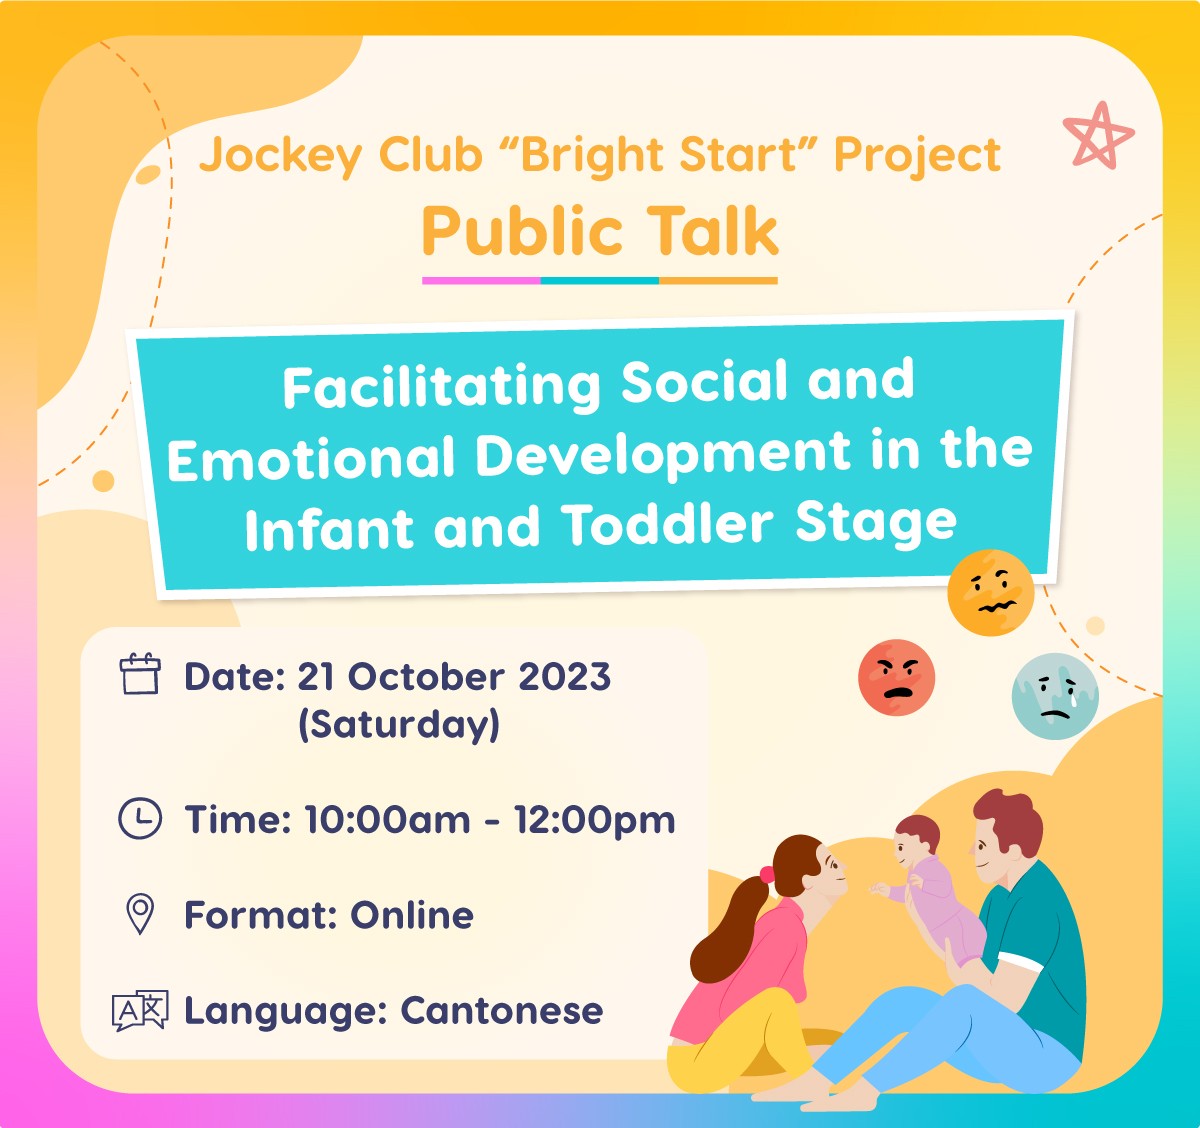 Facilitating Social and Emotional Development in the Infant and Toddler Stage